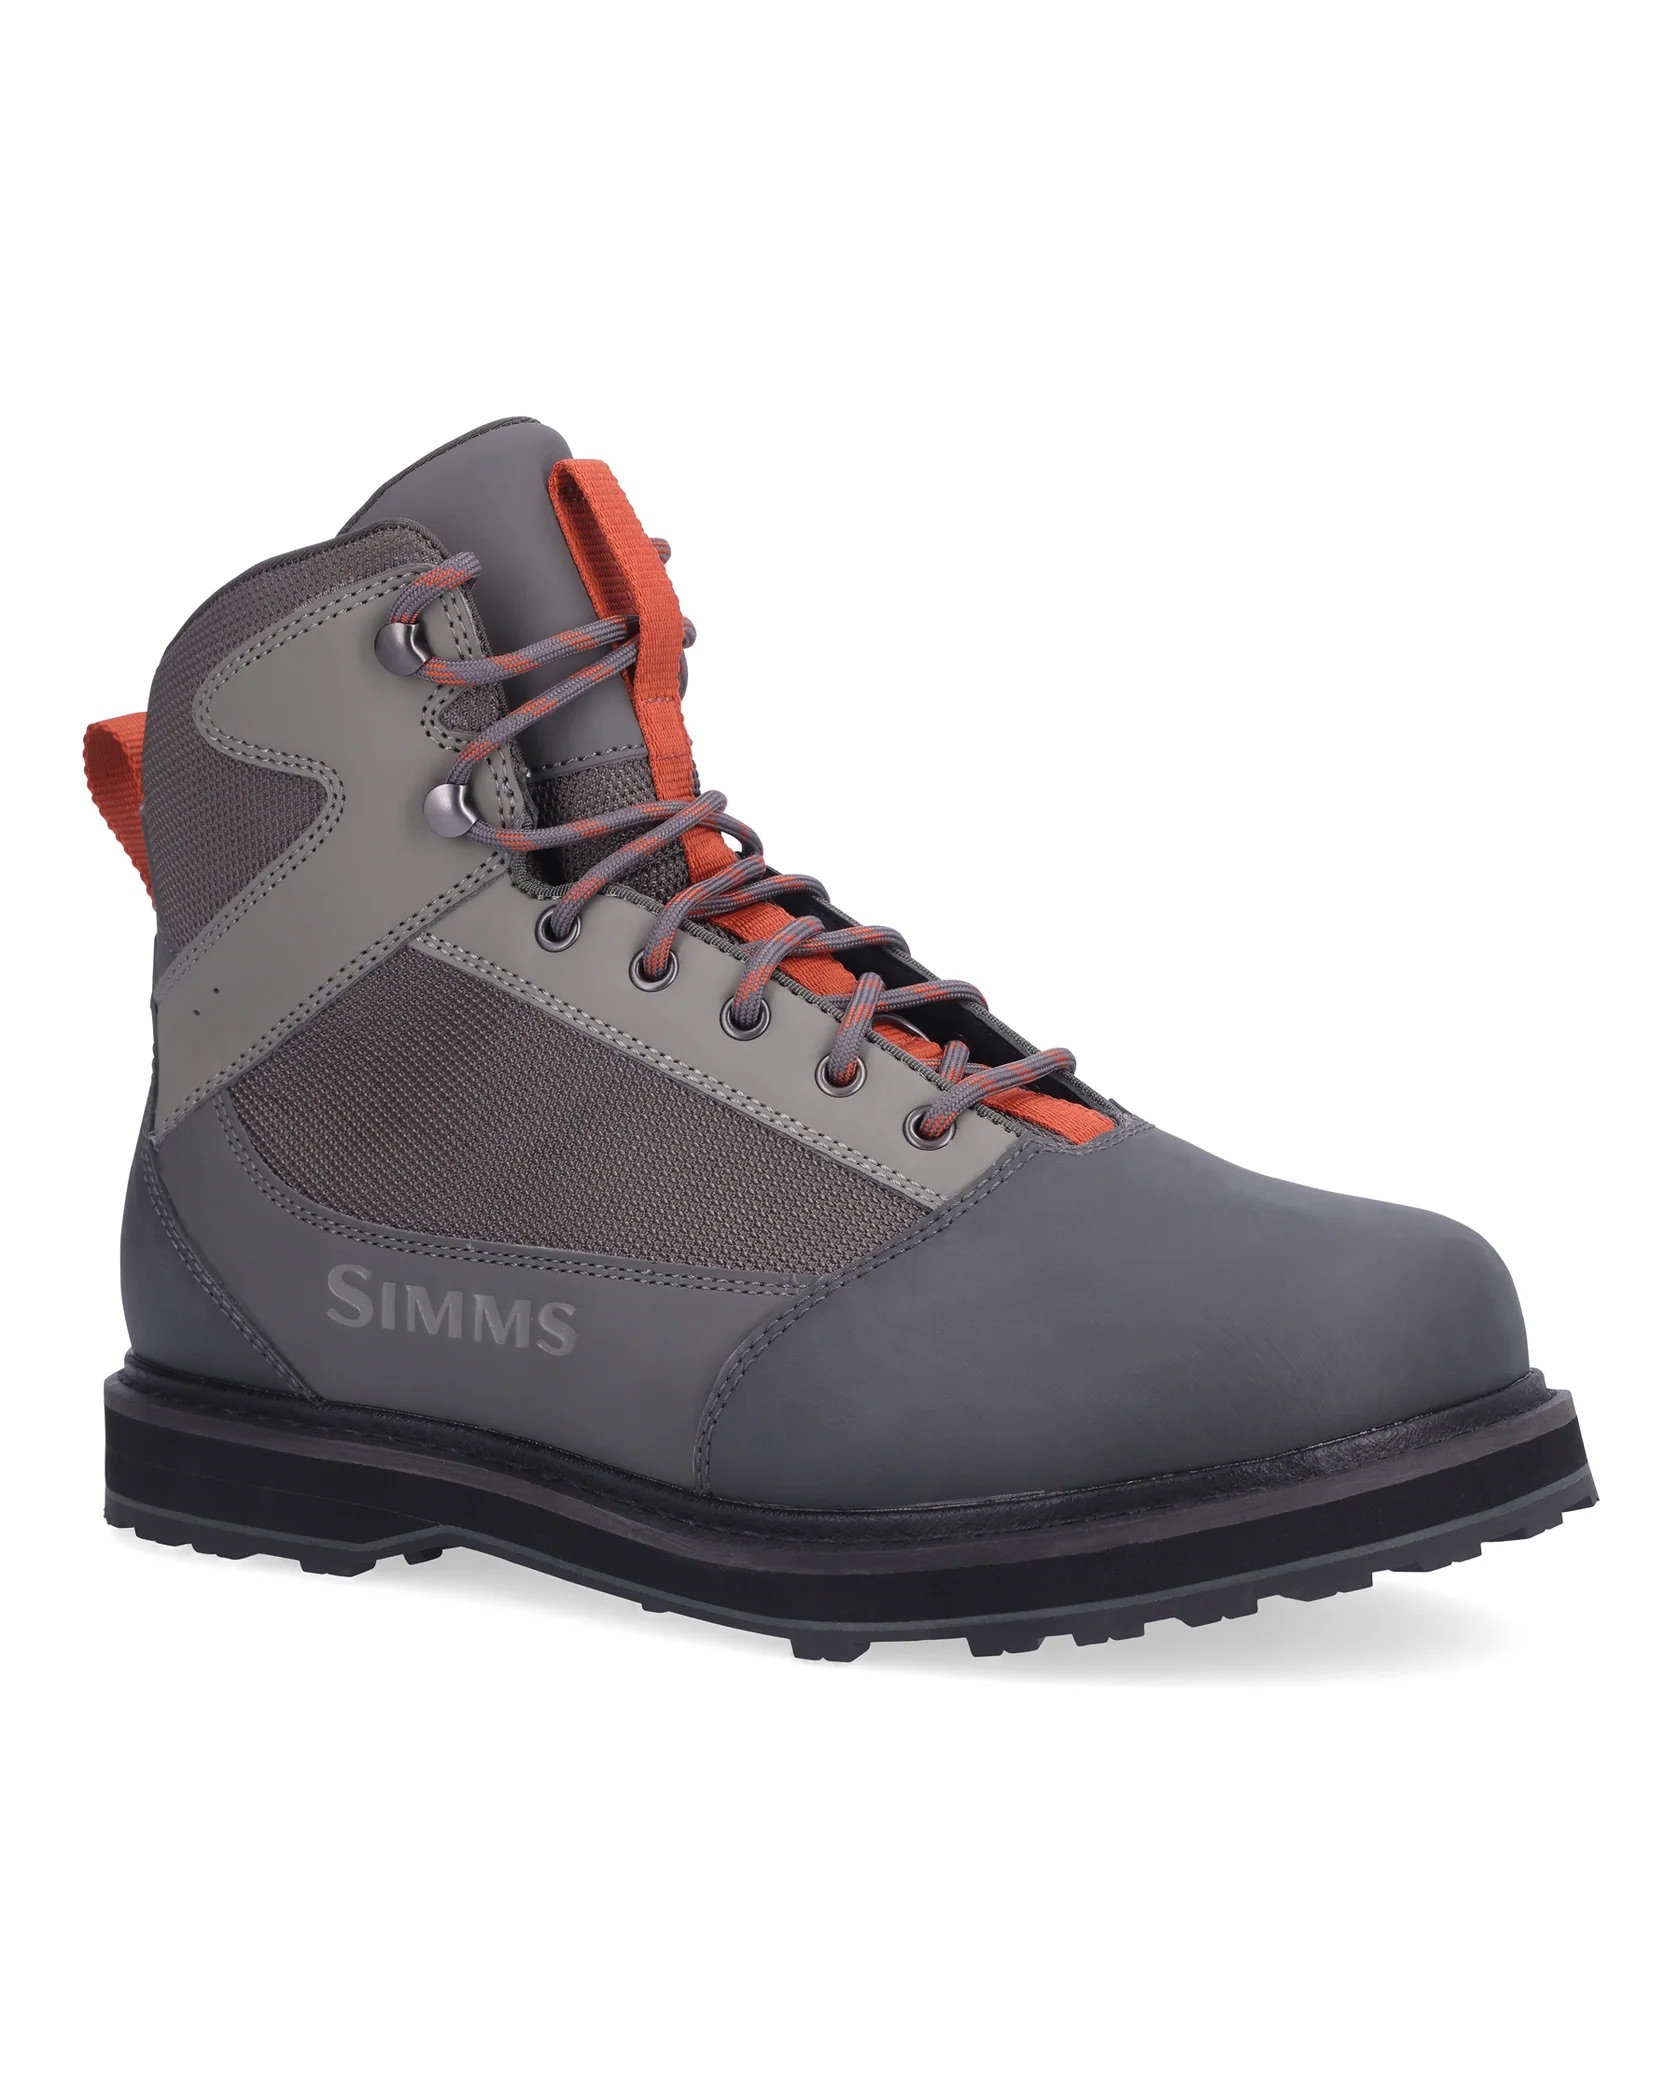 Simms Tributary Wading Boot - Rubber - Size 6